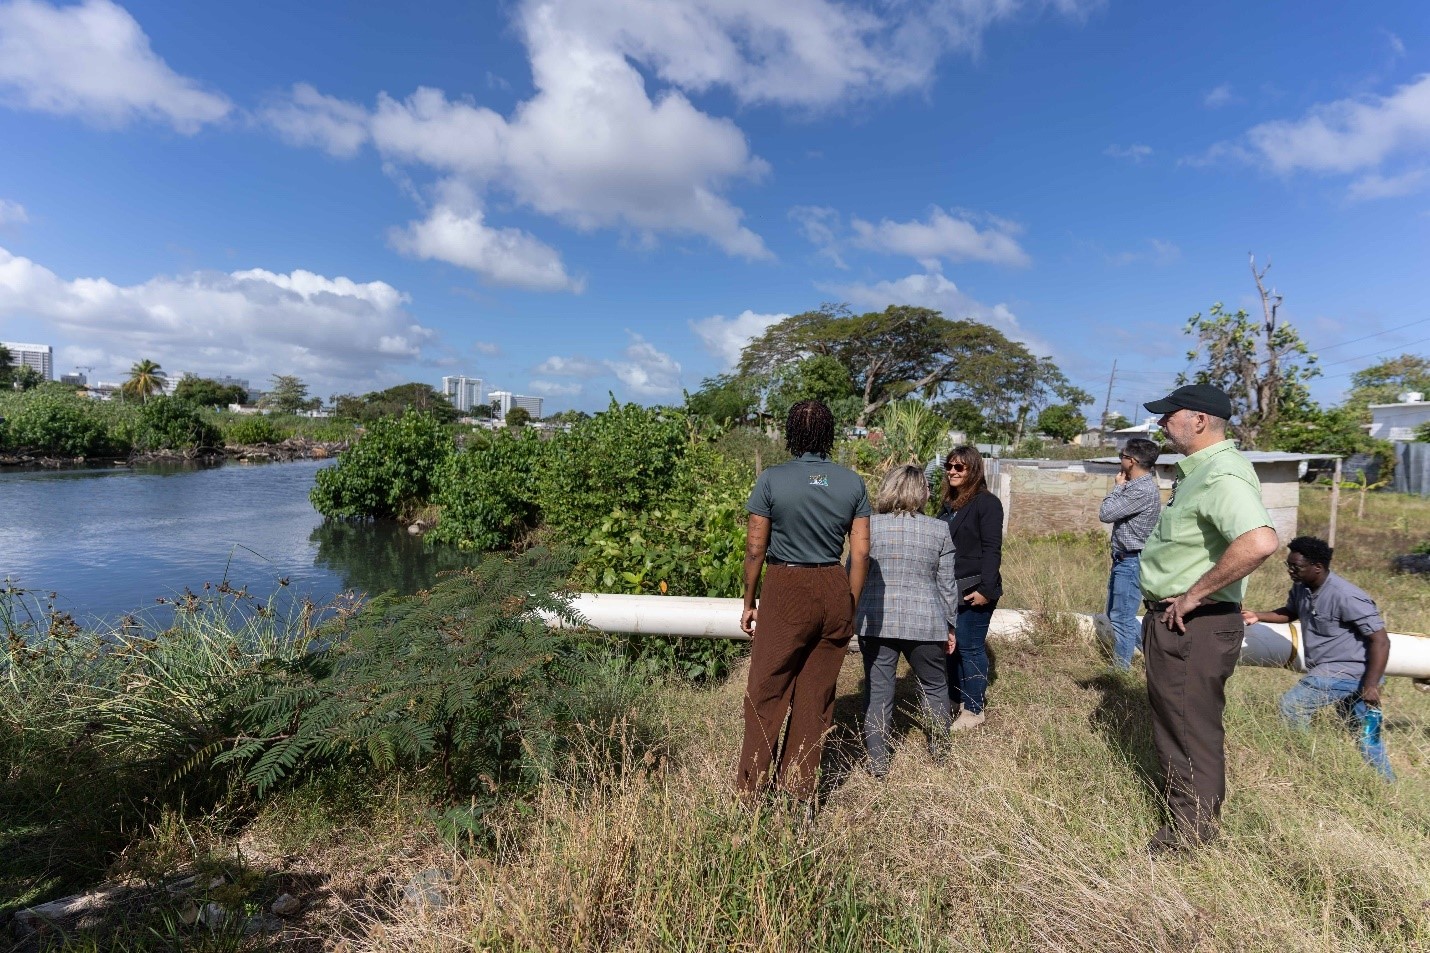 FEMA’s deputy administrator for Resilience in Washington, Victoria Salinas, visited the Caño Martin Peña to assess how hazard mitigation measures will help communities prepare for nature’s future challenges. 